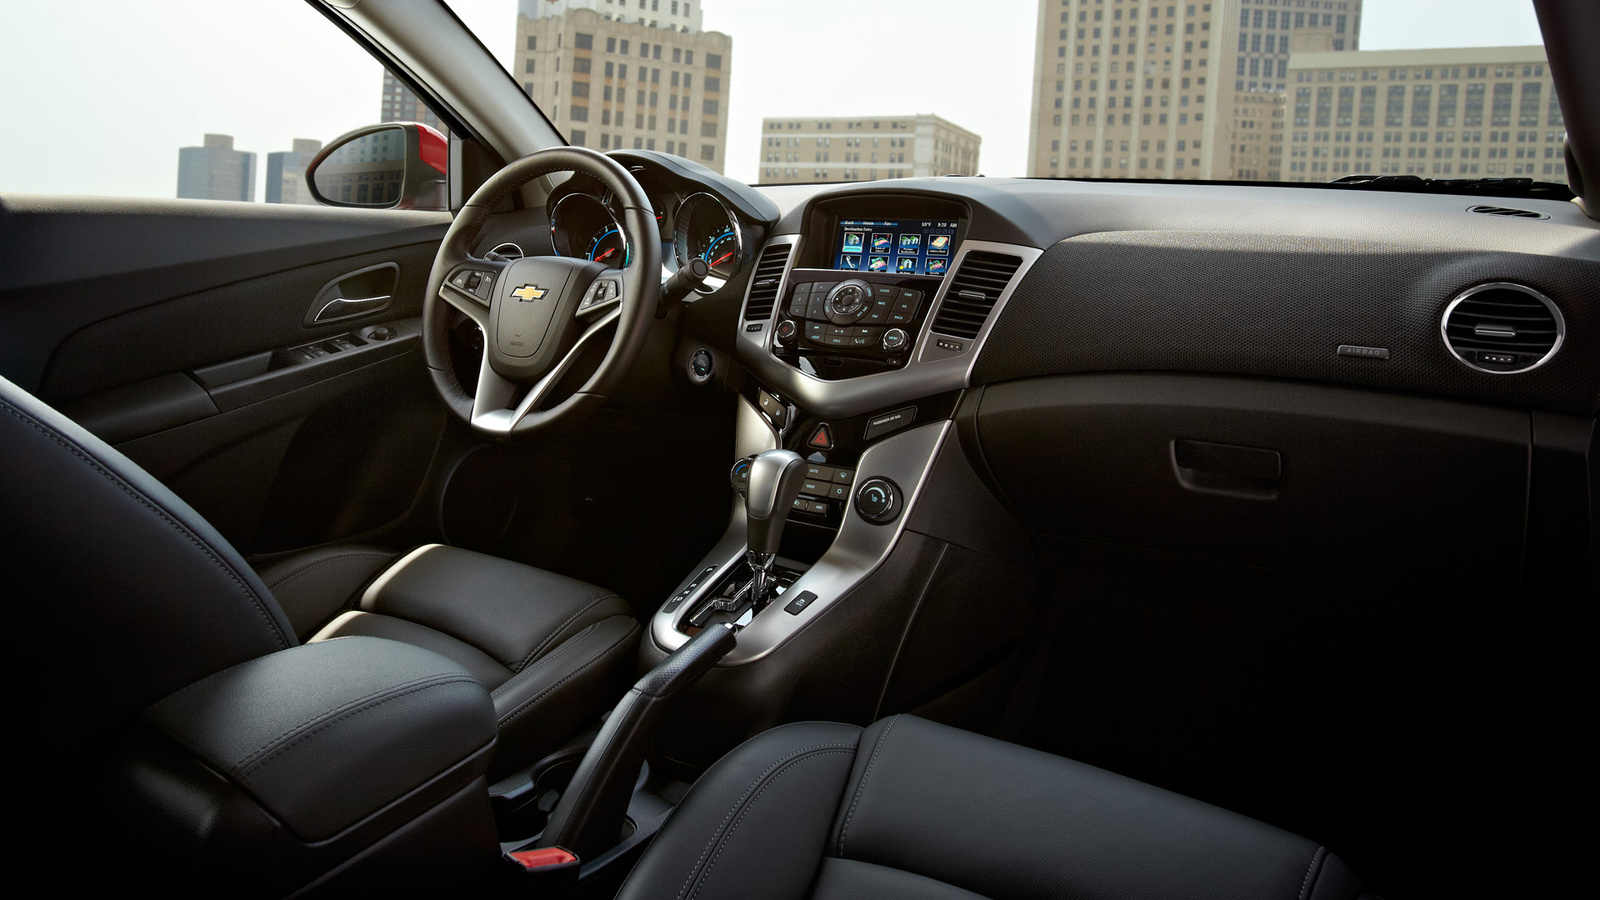 2014 Chevrolet Equinox Vin Number Search Autodetective